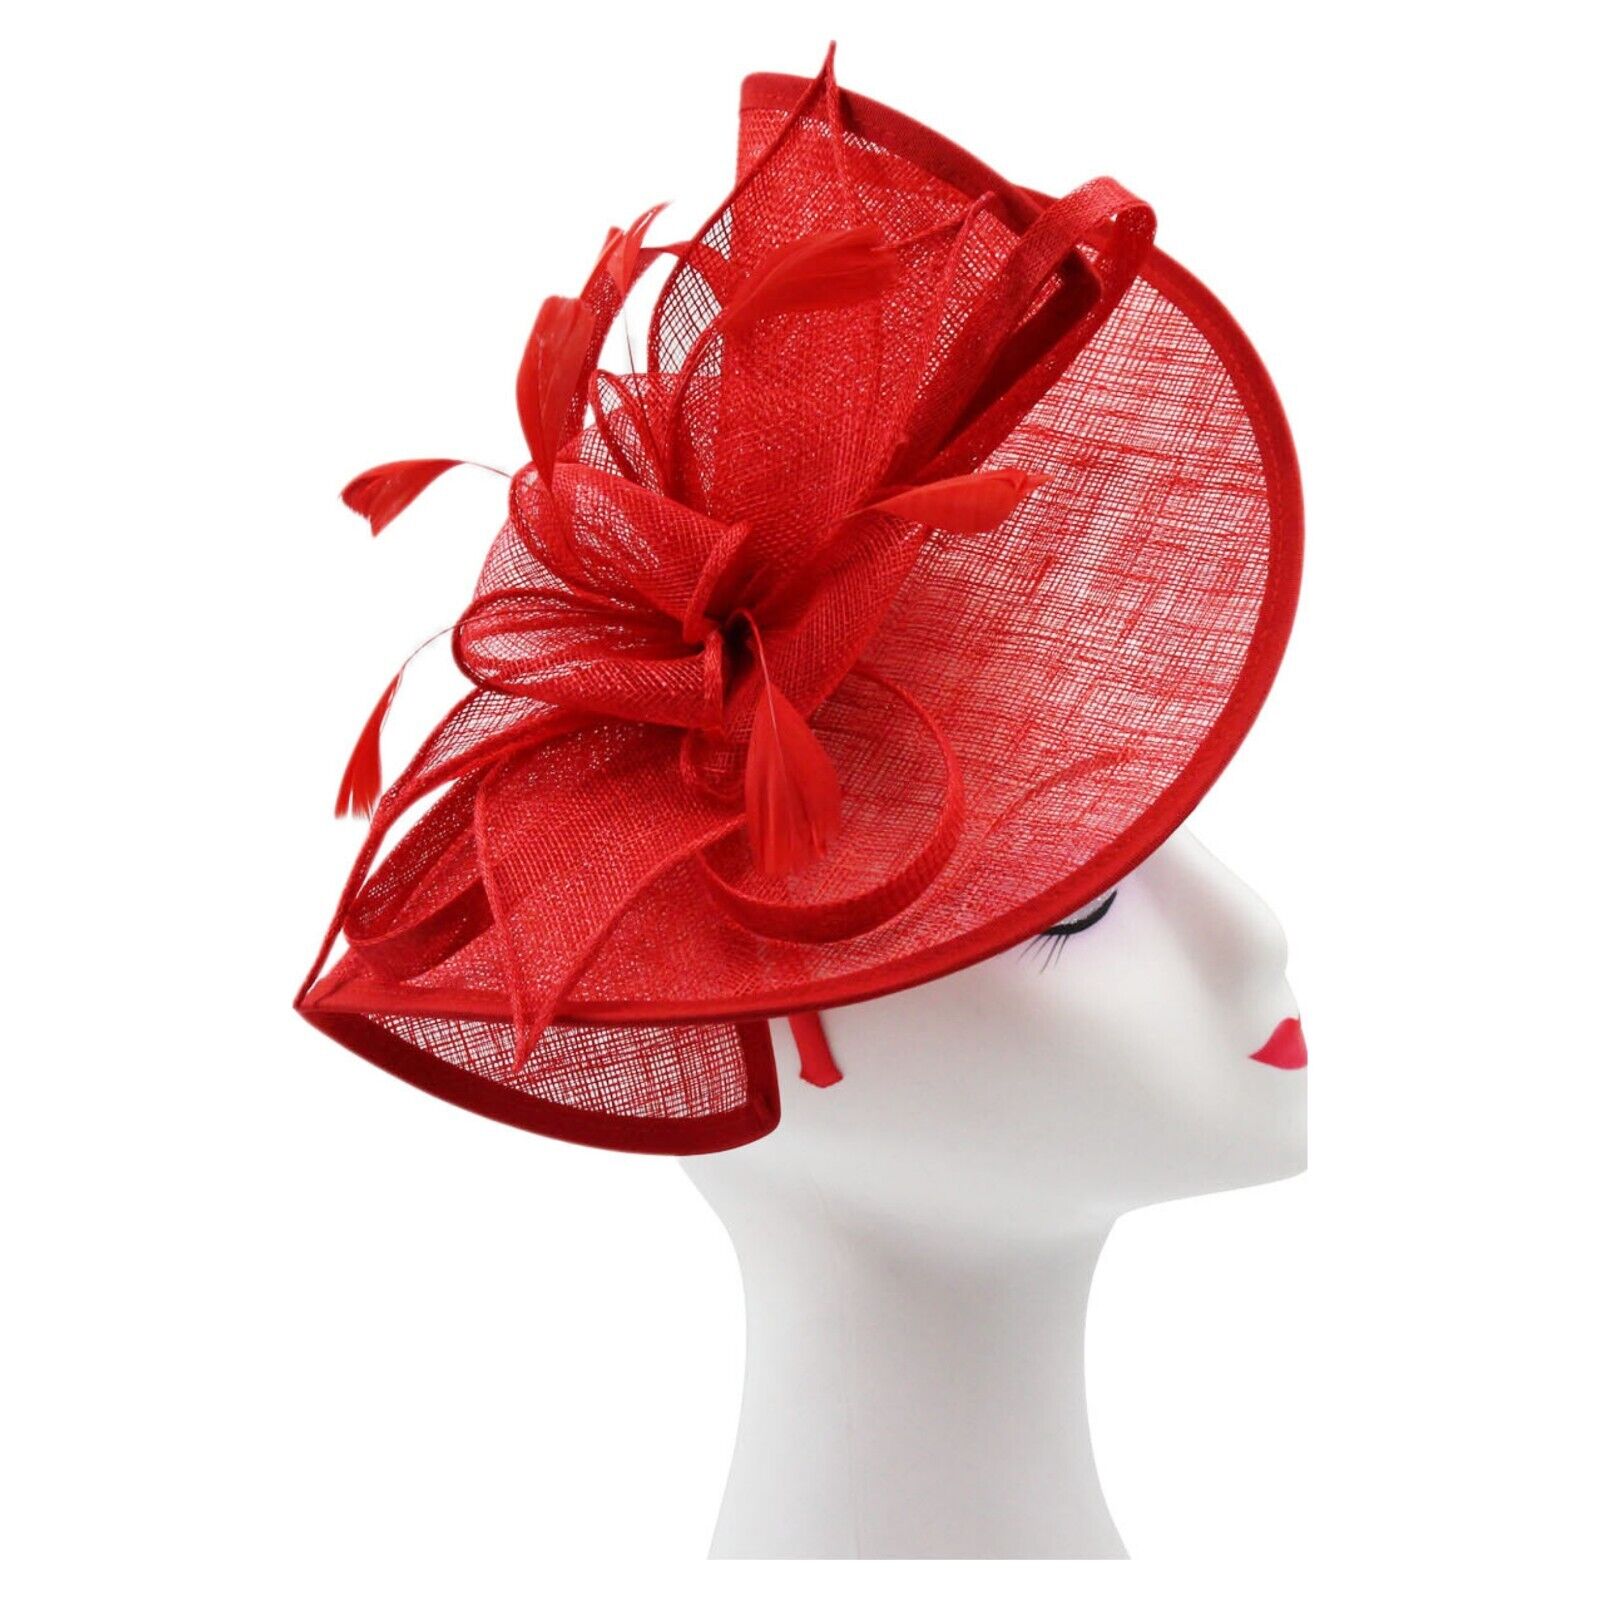 Asymmetric Sinamay Disc Fascinator with Feathers